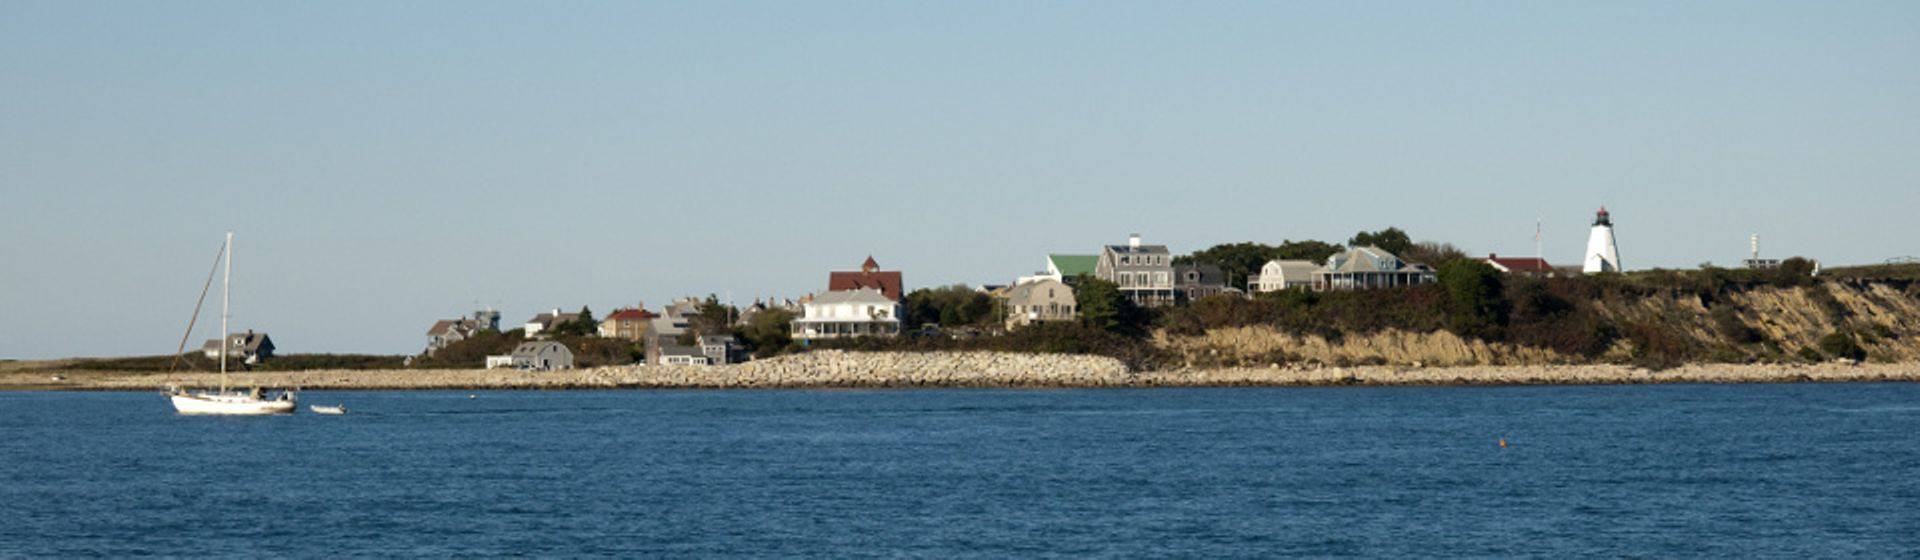 Holidays to Cape Cod Image